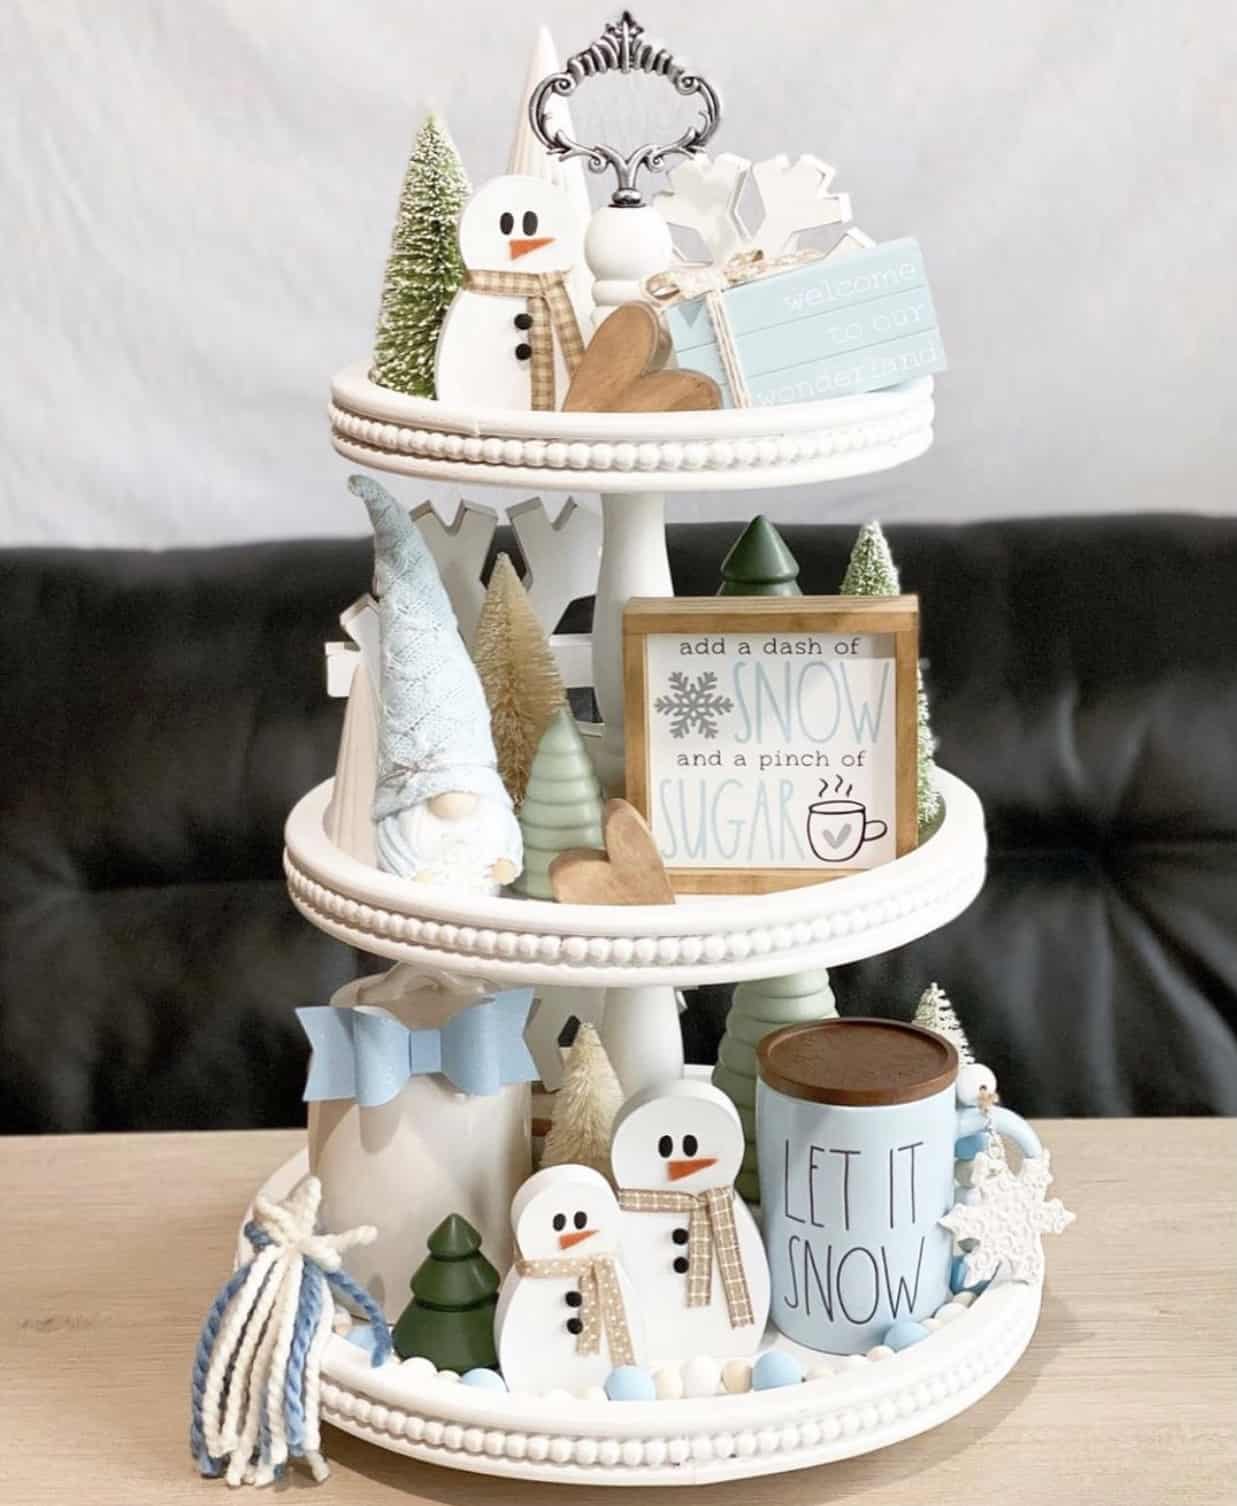 3-tiered white cake stand themed with winter snowman figures, mini Christmas trees and snowflakes